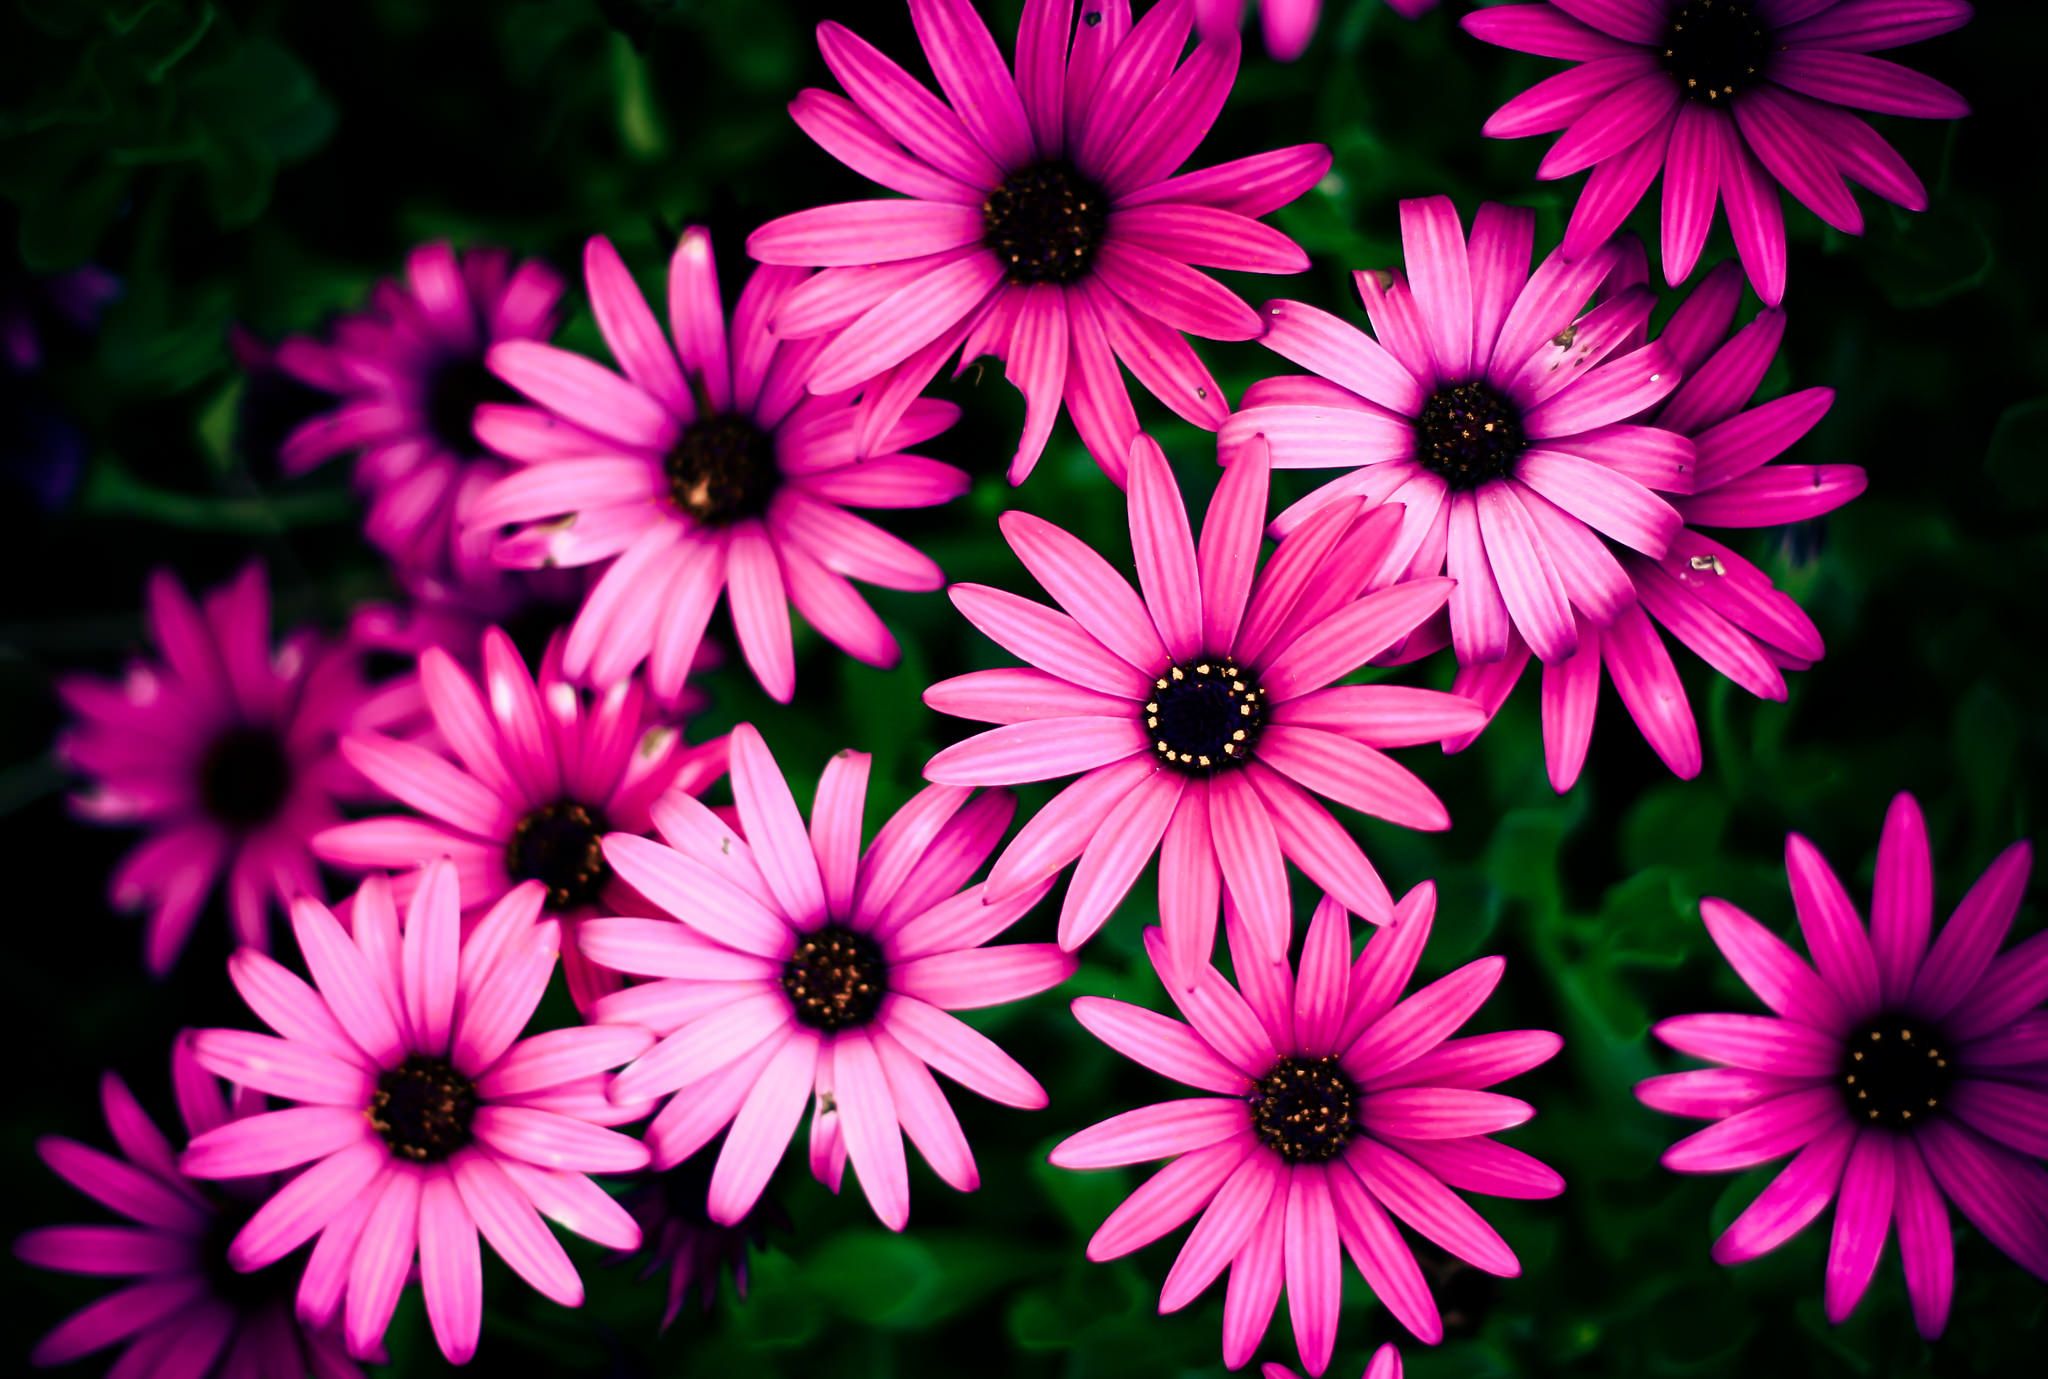 Daisy Background, Wallpaper, Image, Picture. Design Trends PSD, Vector Downloads